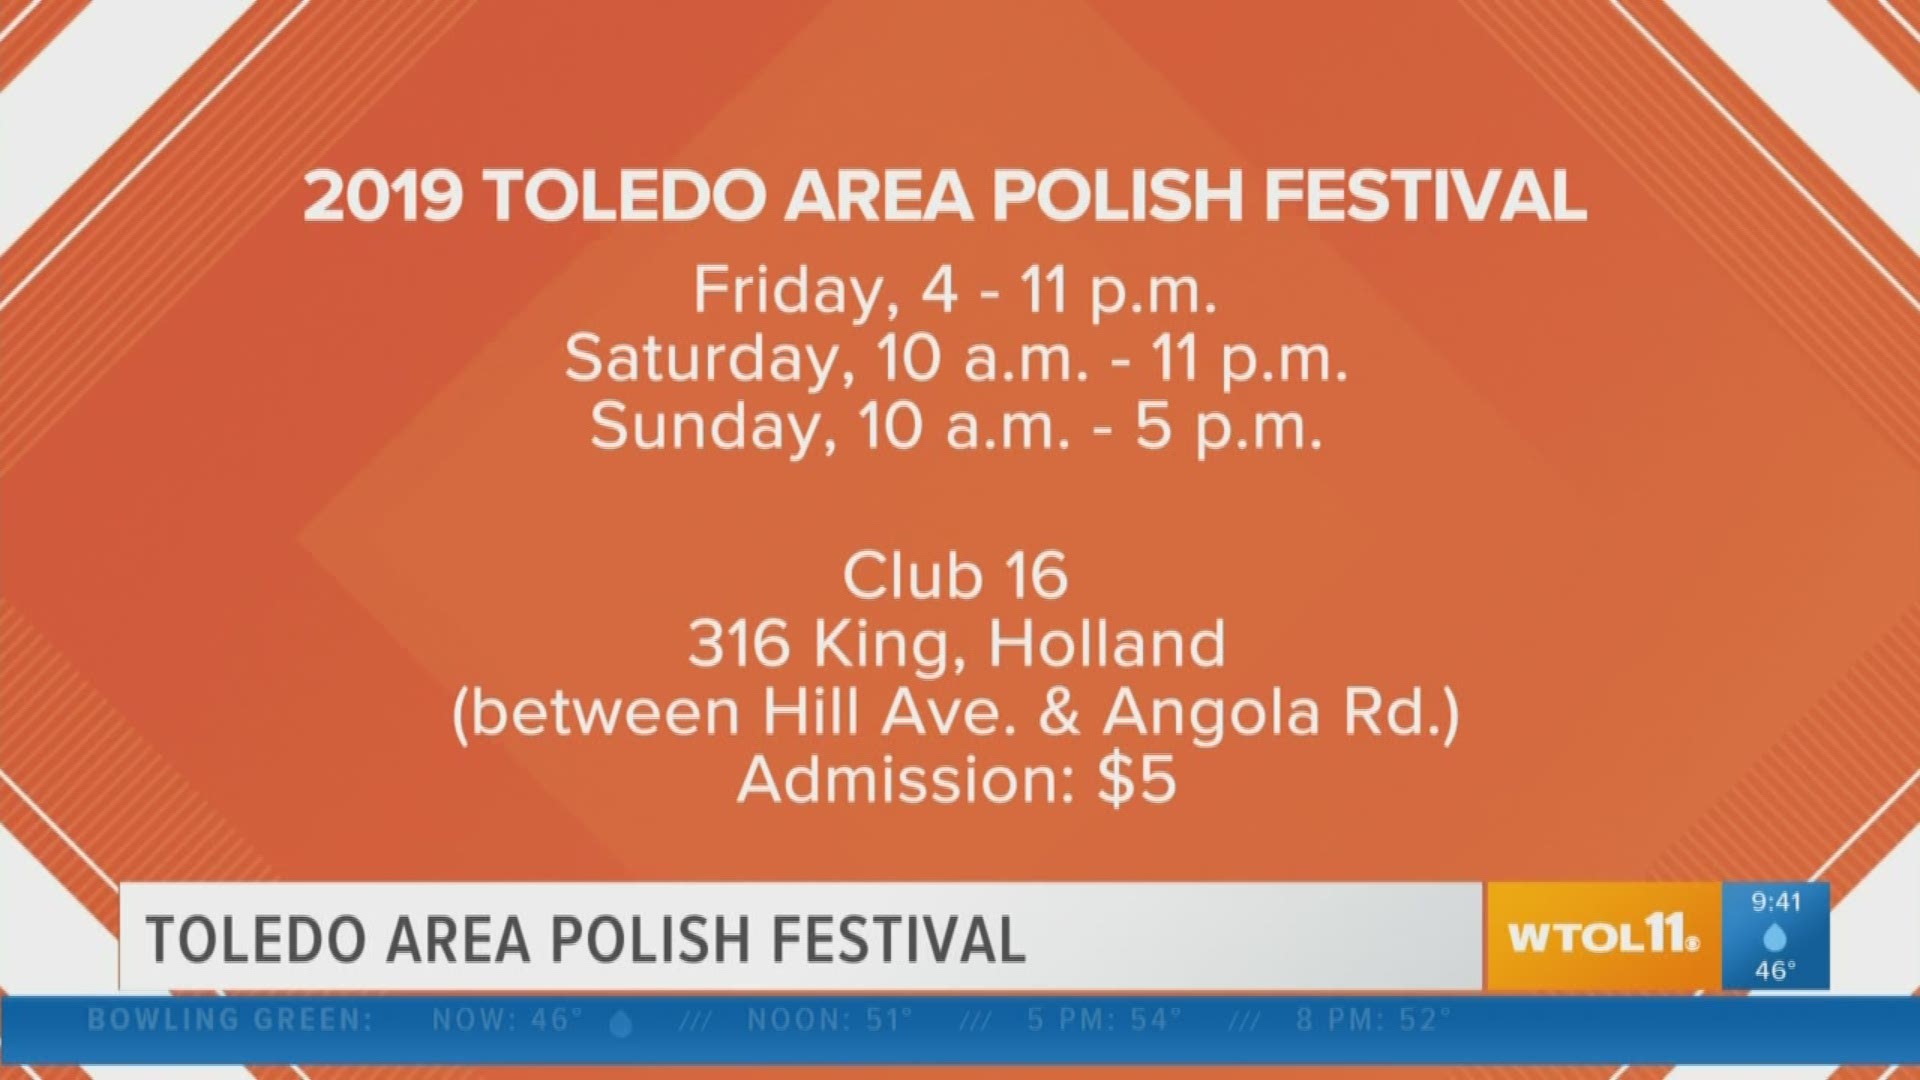 Looking for something to do this weekend? Check out the Toledo Area Polish Festival!